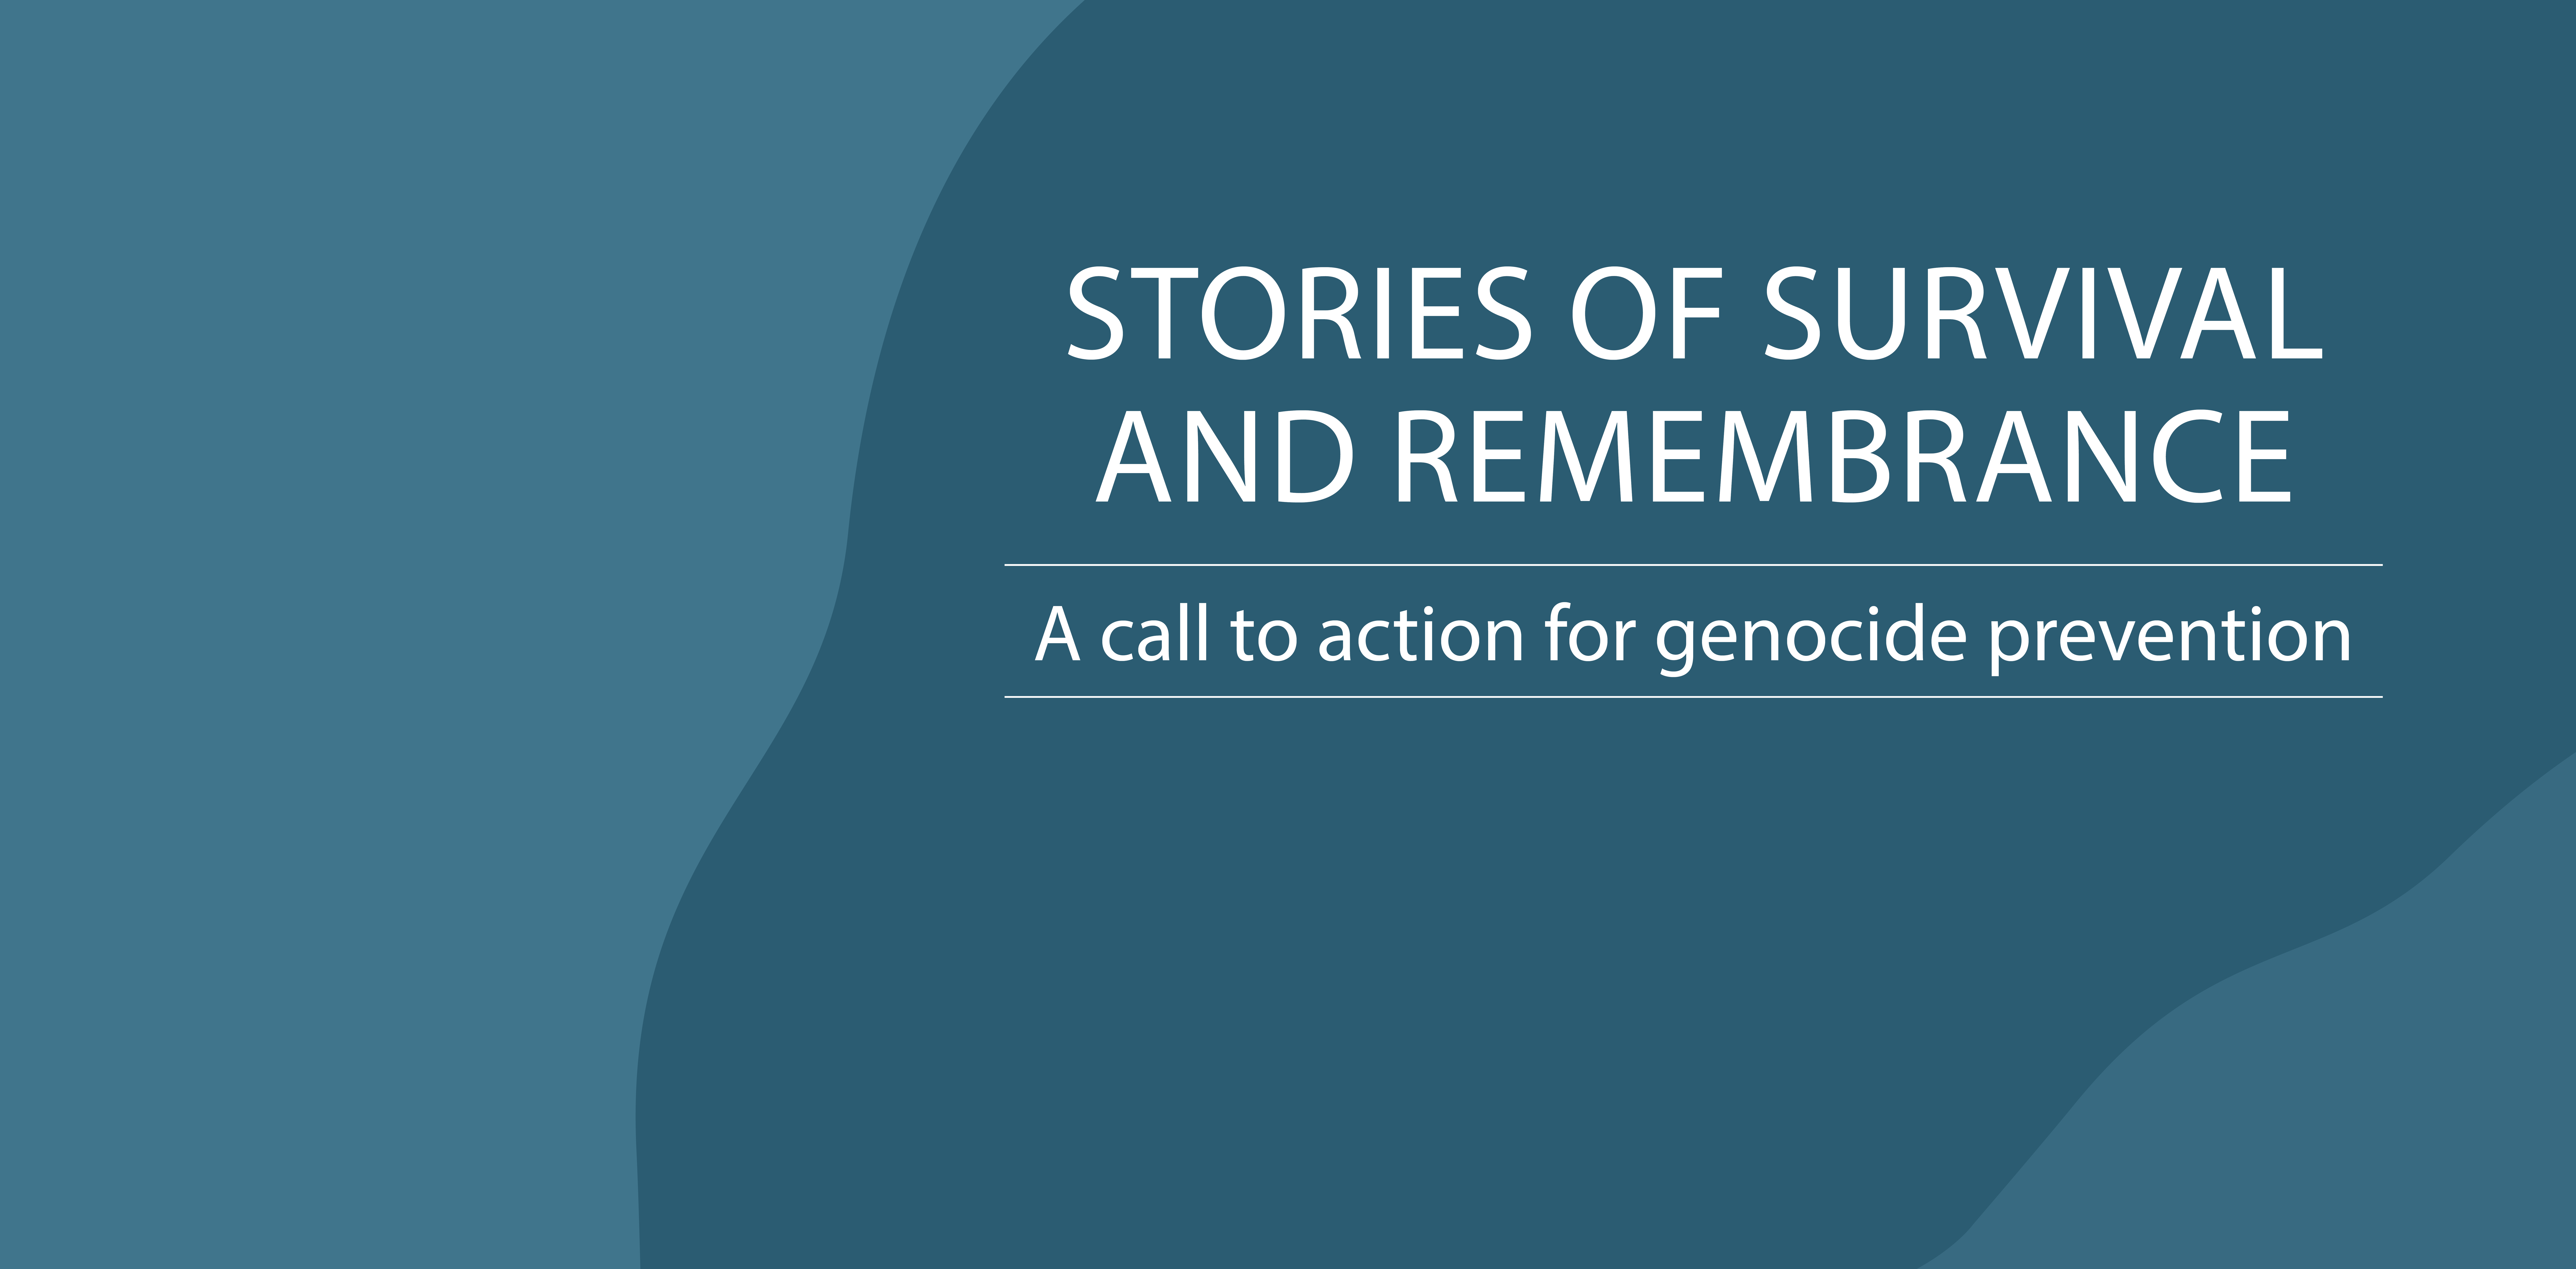 Stories of Survival and Remembrance: A call to action for genocide prevention